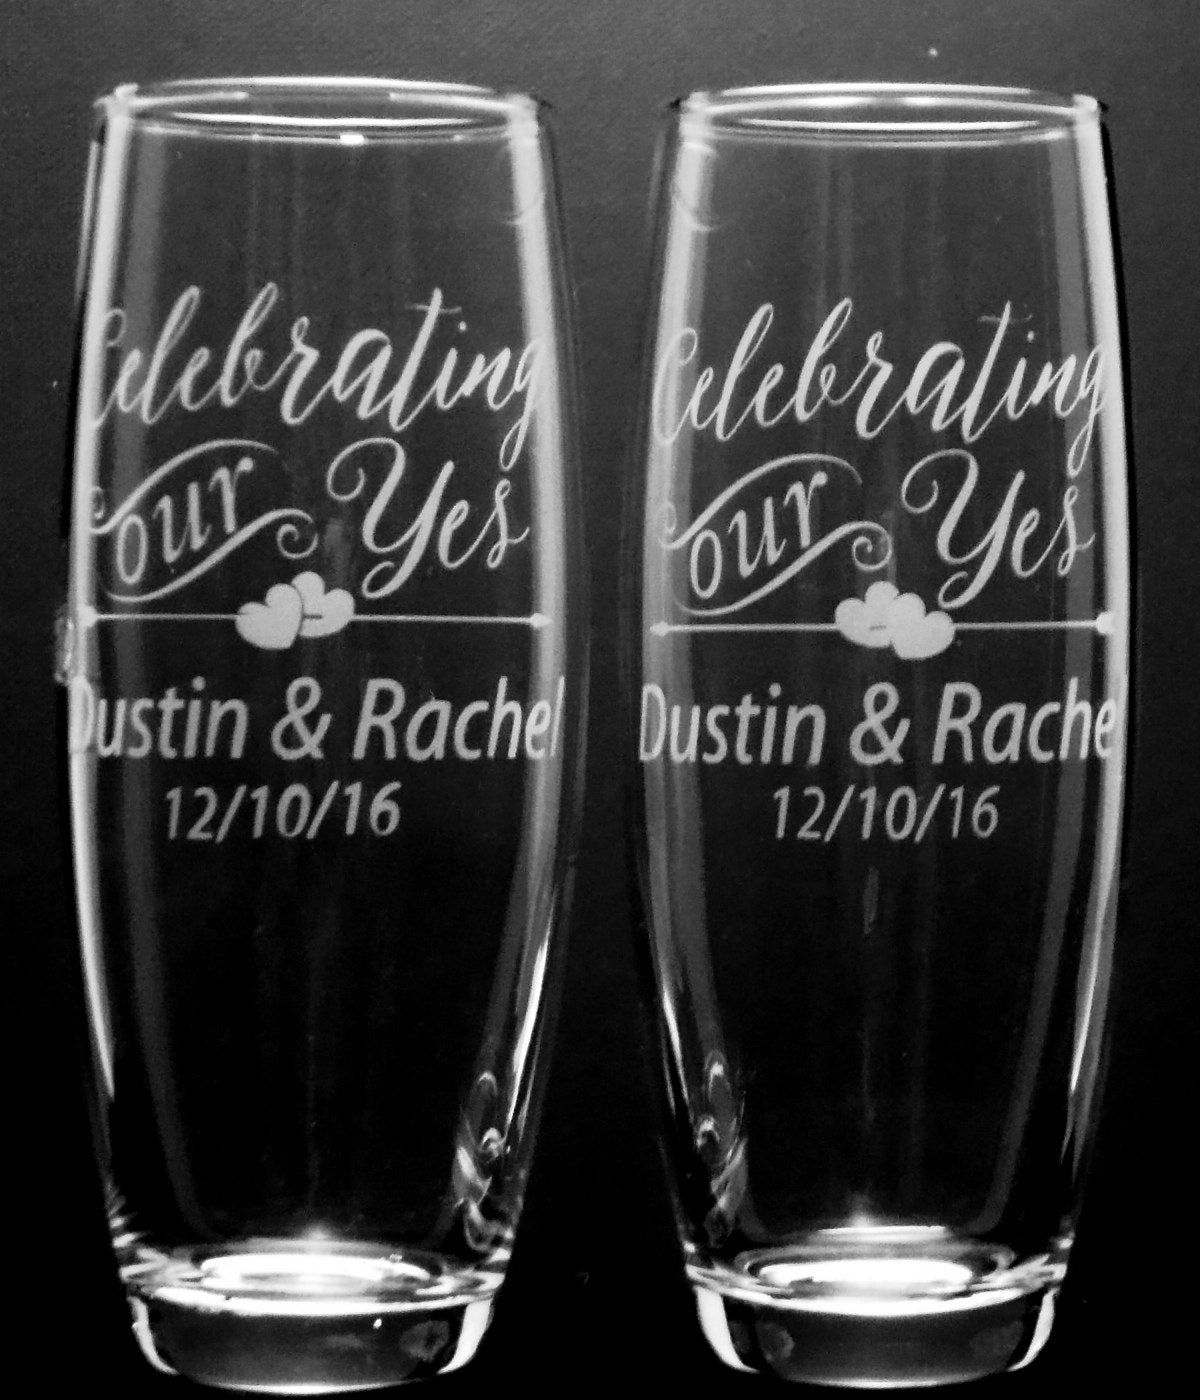 Celebrating our Yes Personalized Stemless Champagne Flutes Wedding Toasting Flutes Bride and Groom Gift Engagement Gift